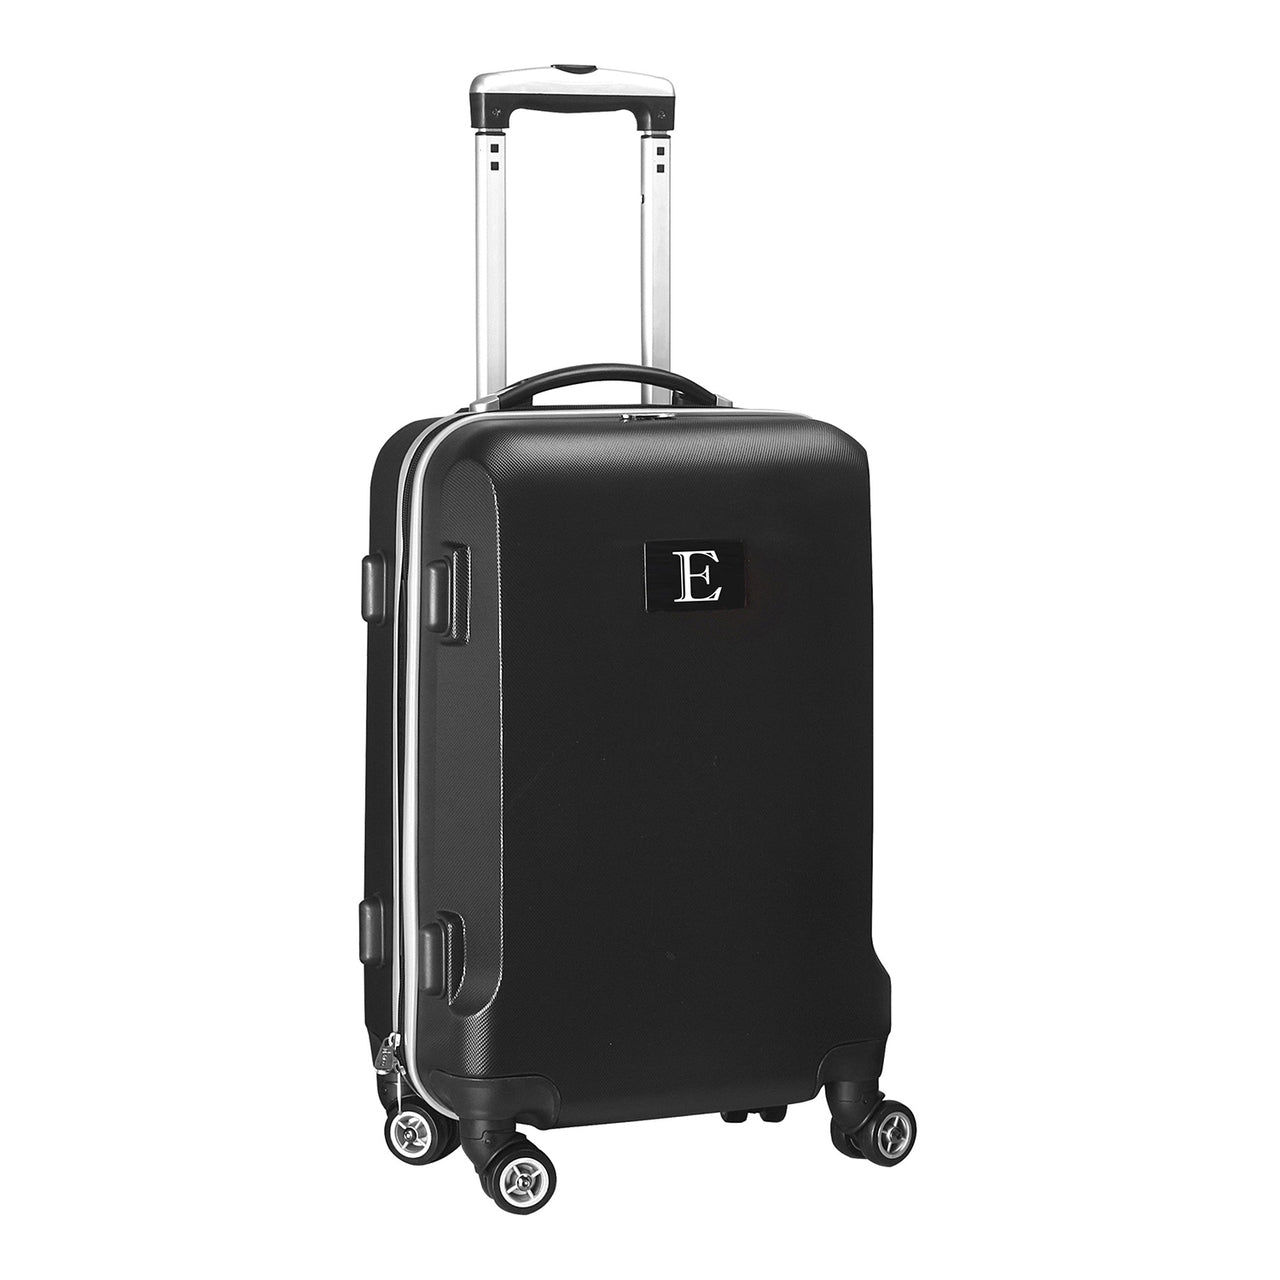 Personalized Initial Name letter "E" 20 inches Carry on Hardcase Spinner Luggage by Mojo in BLACK